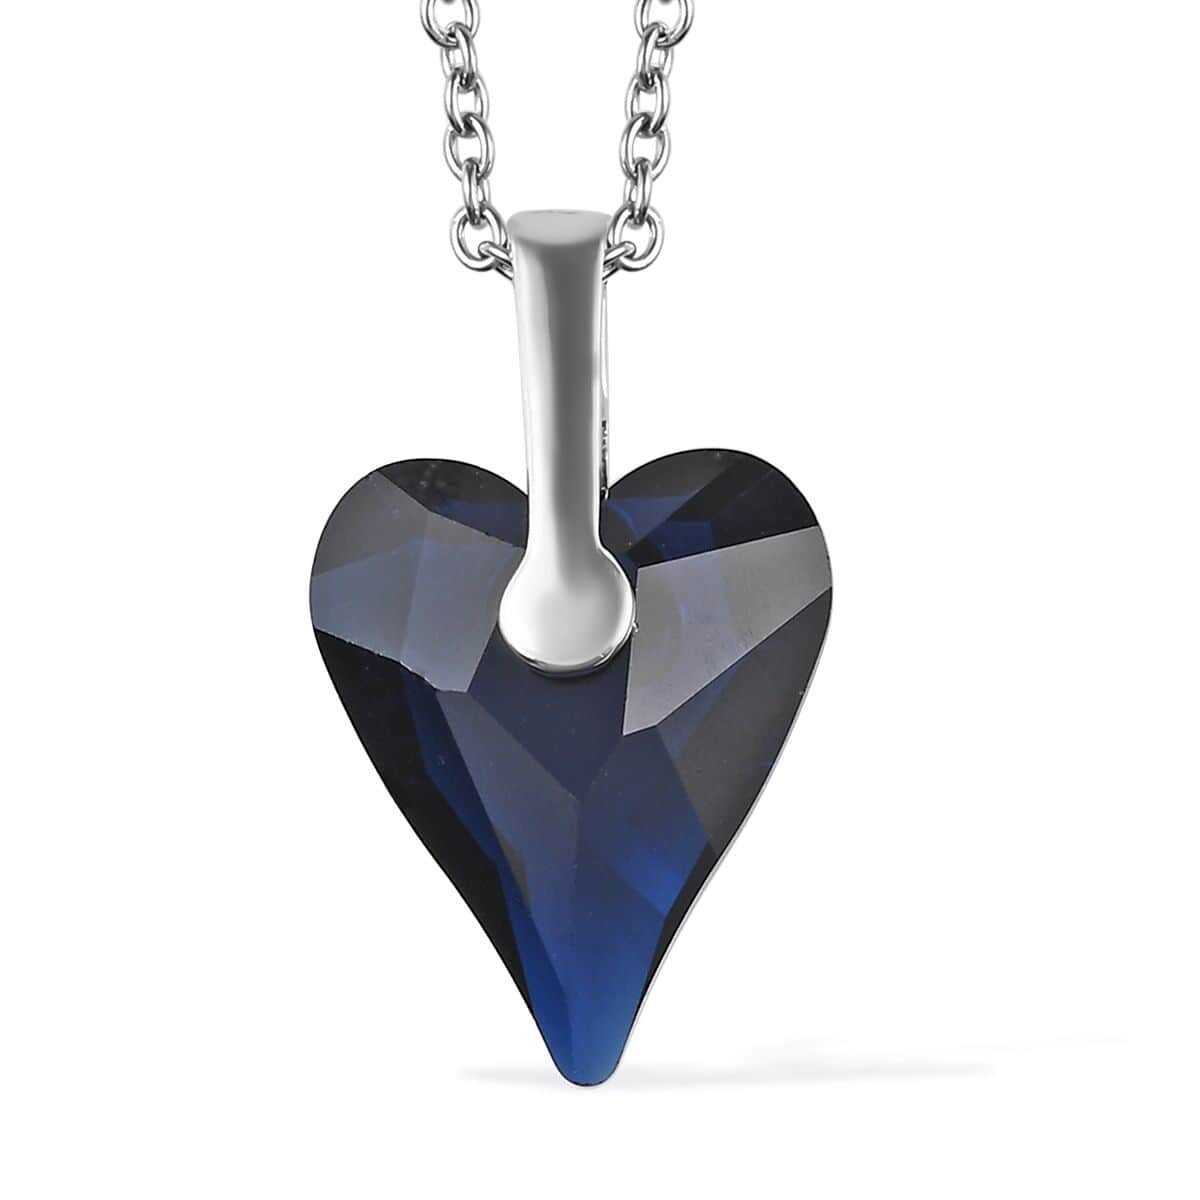 Designer Premium Dark Indigo Austrian Crystal Heart Pendant in Sterling Silver with Stainless Steel Chain 20 Inches image number 0